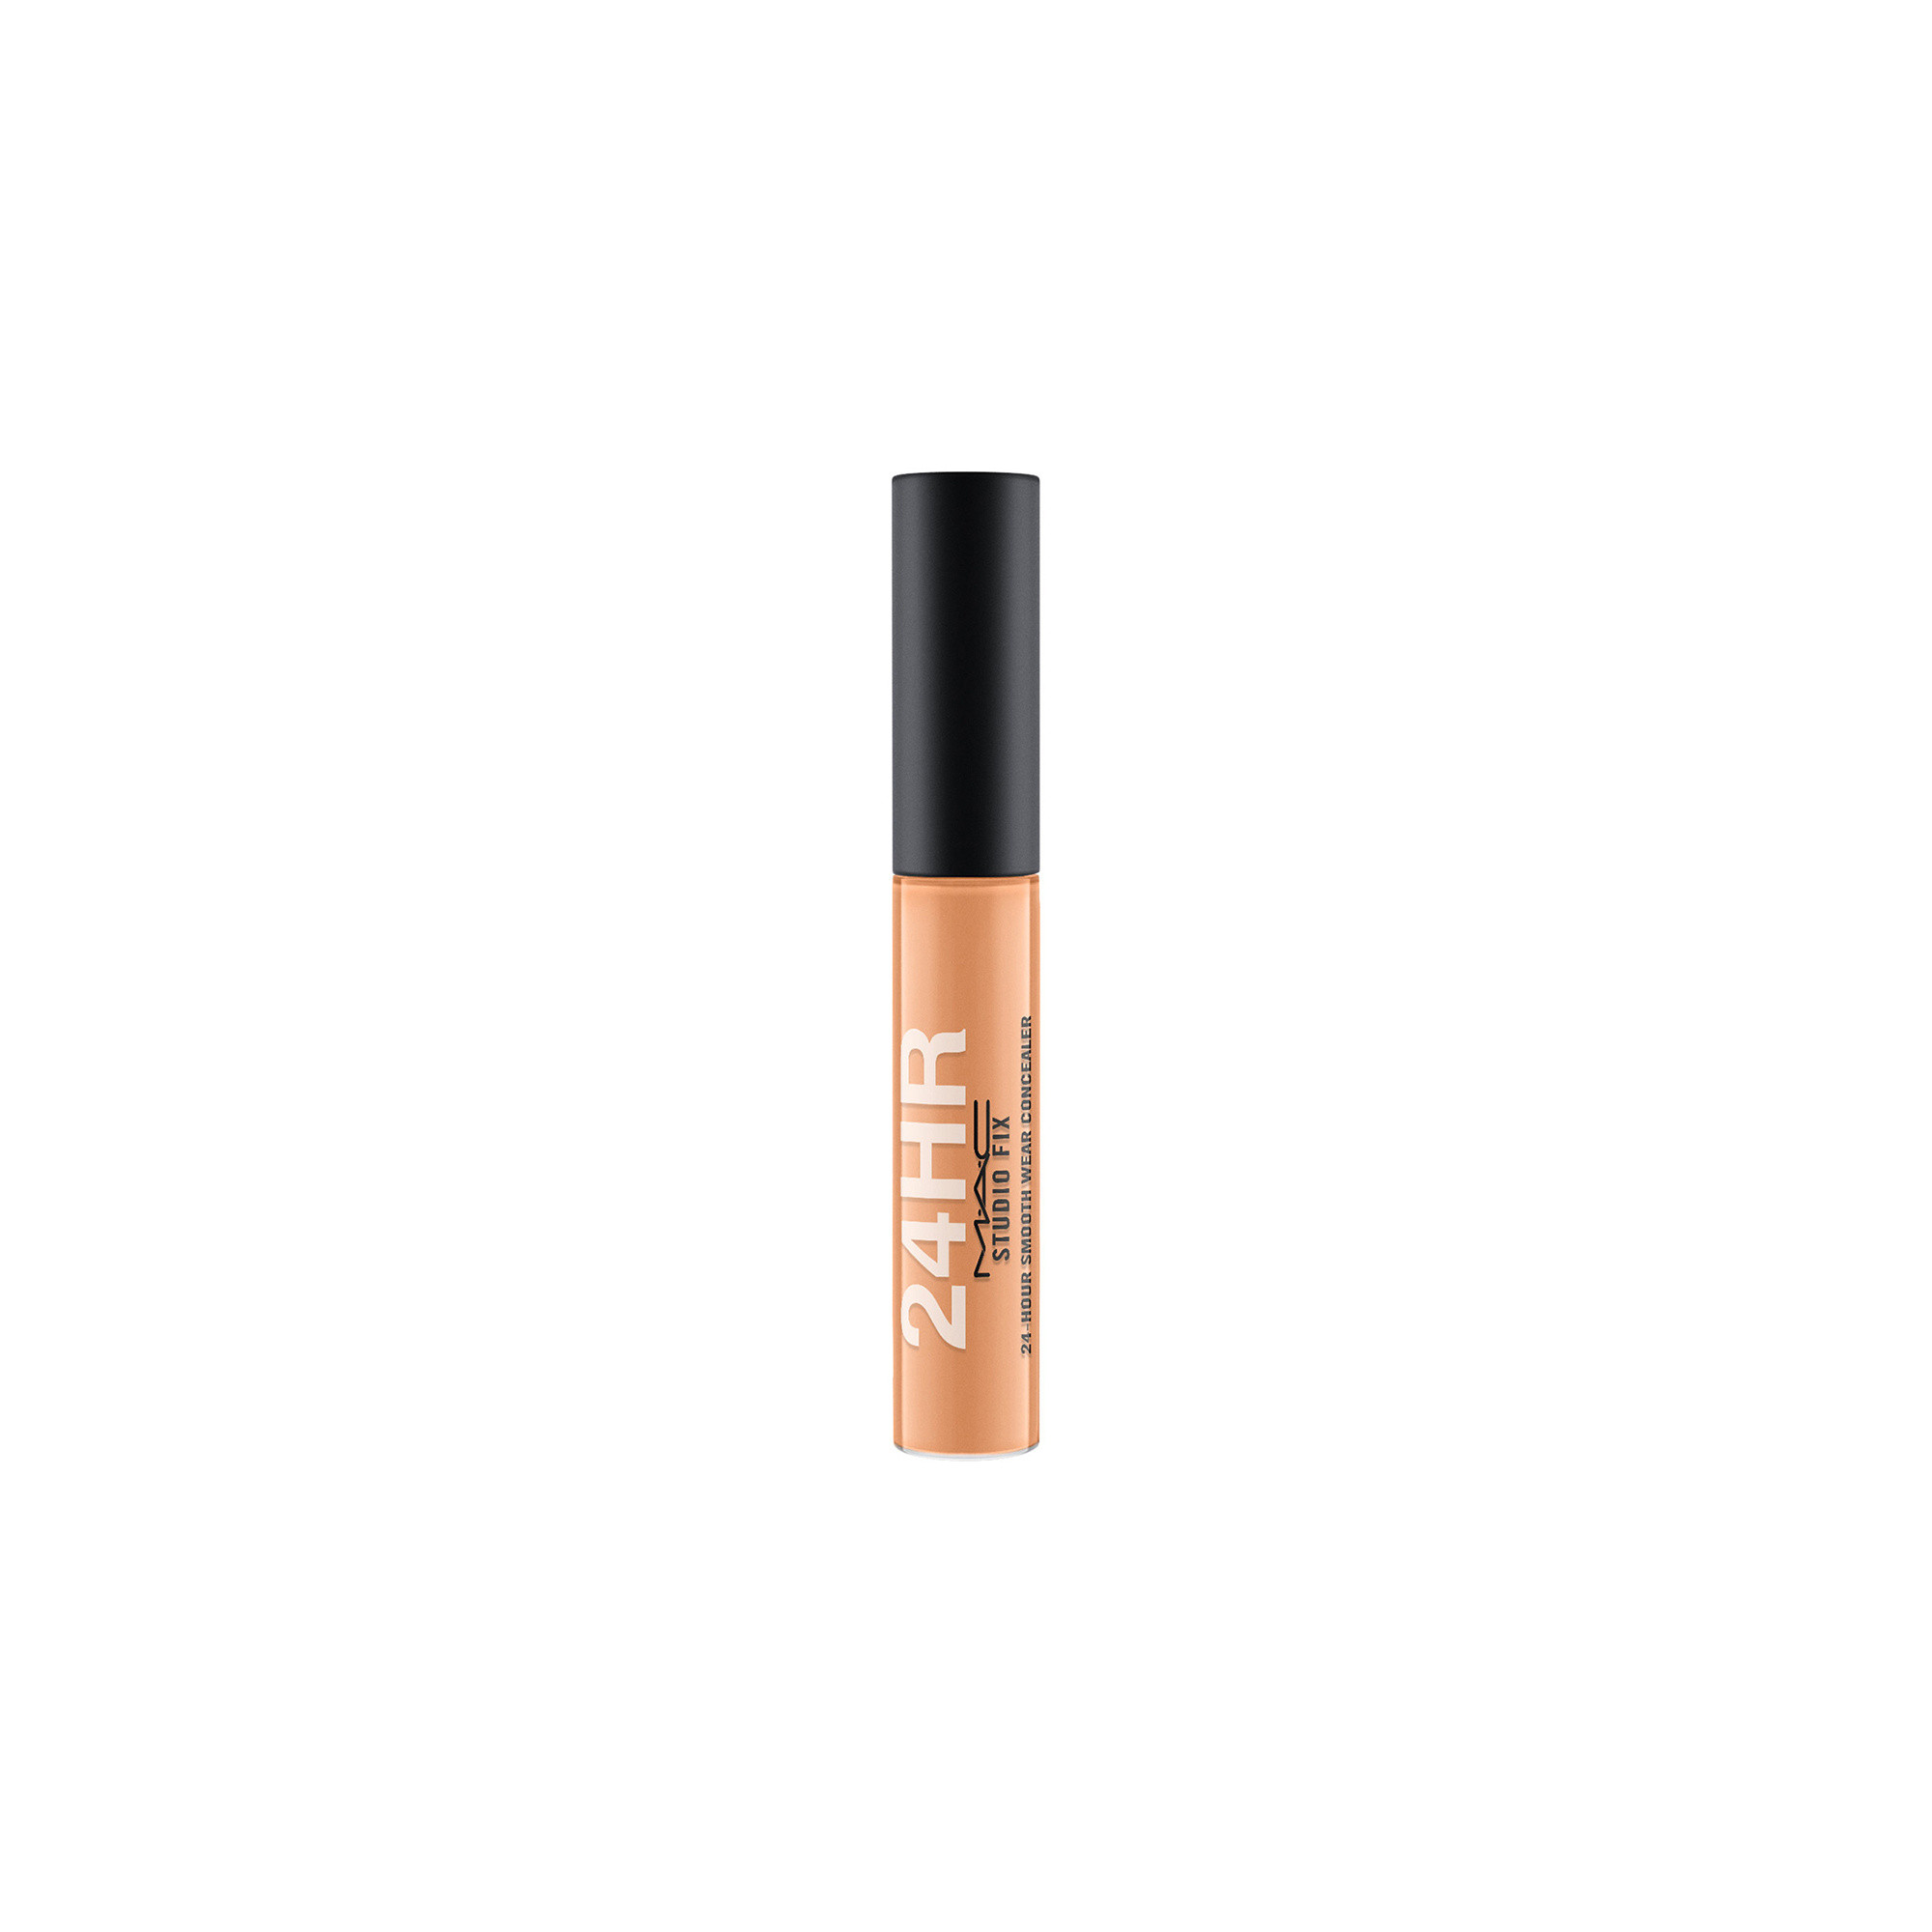 Studio Fix 24H Concealer - NW40, NW40, large